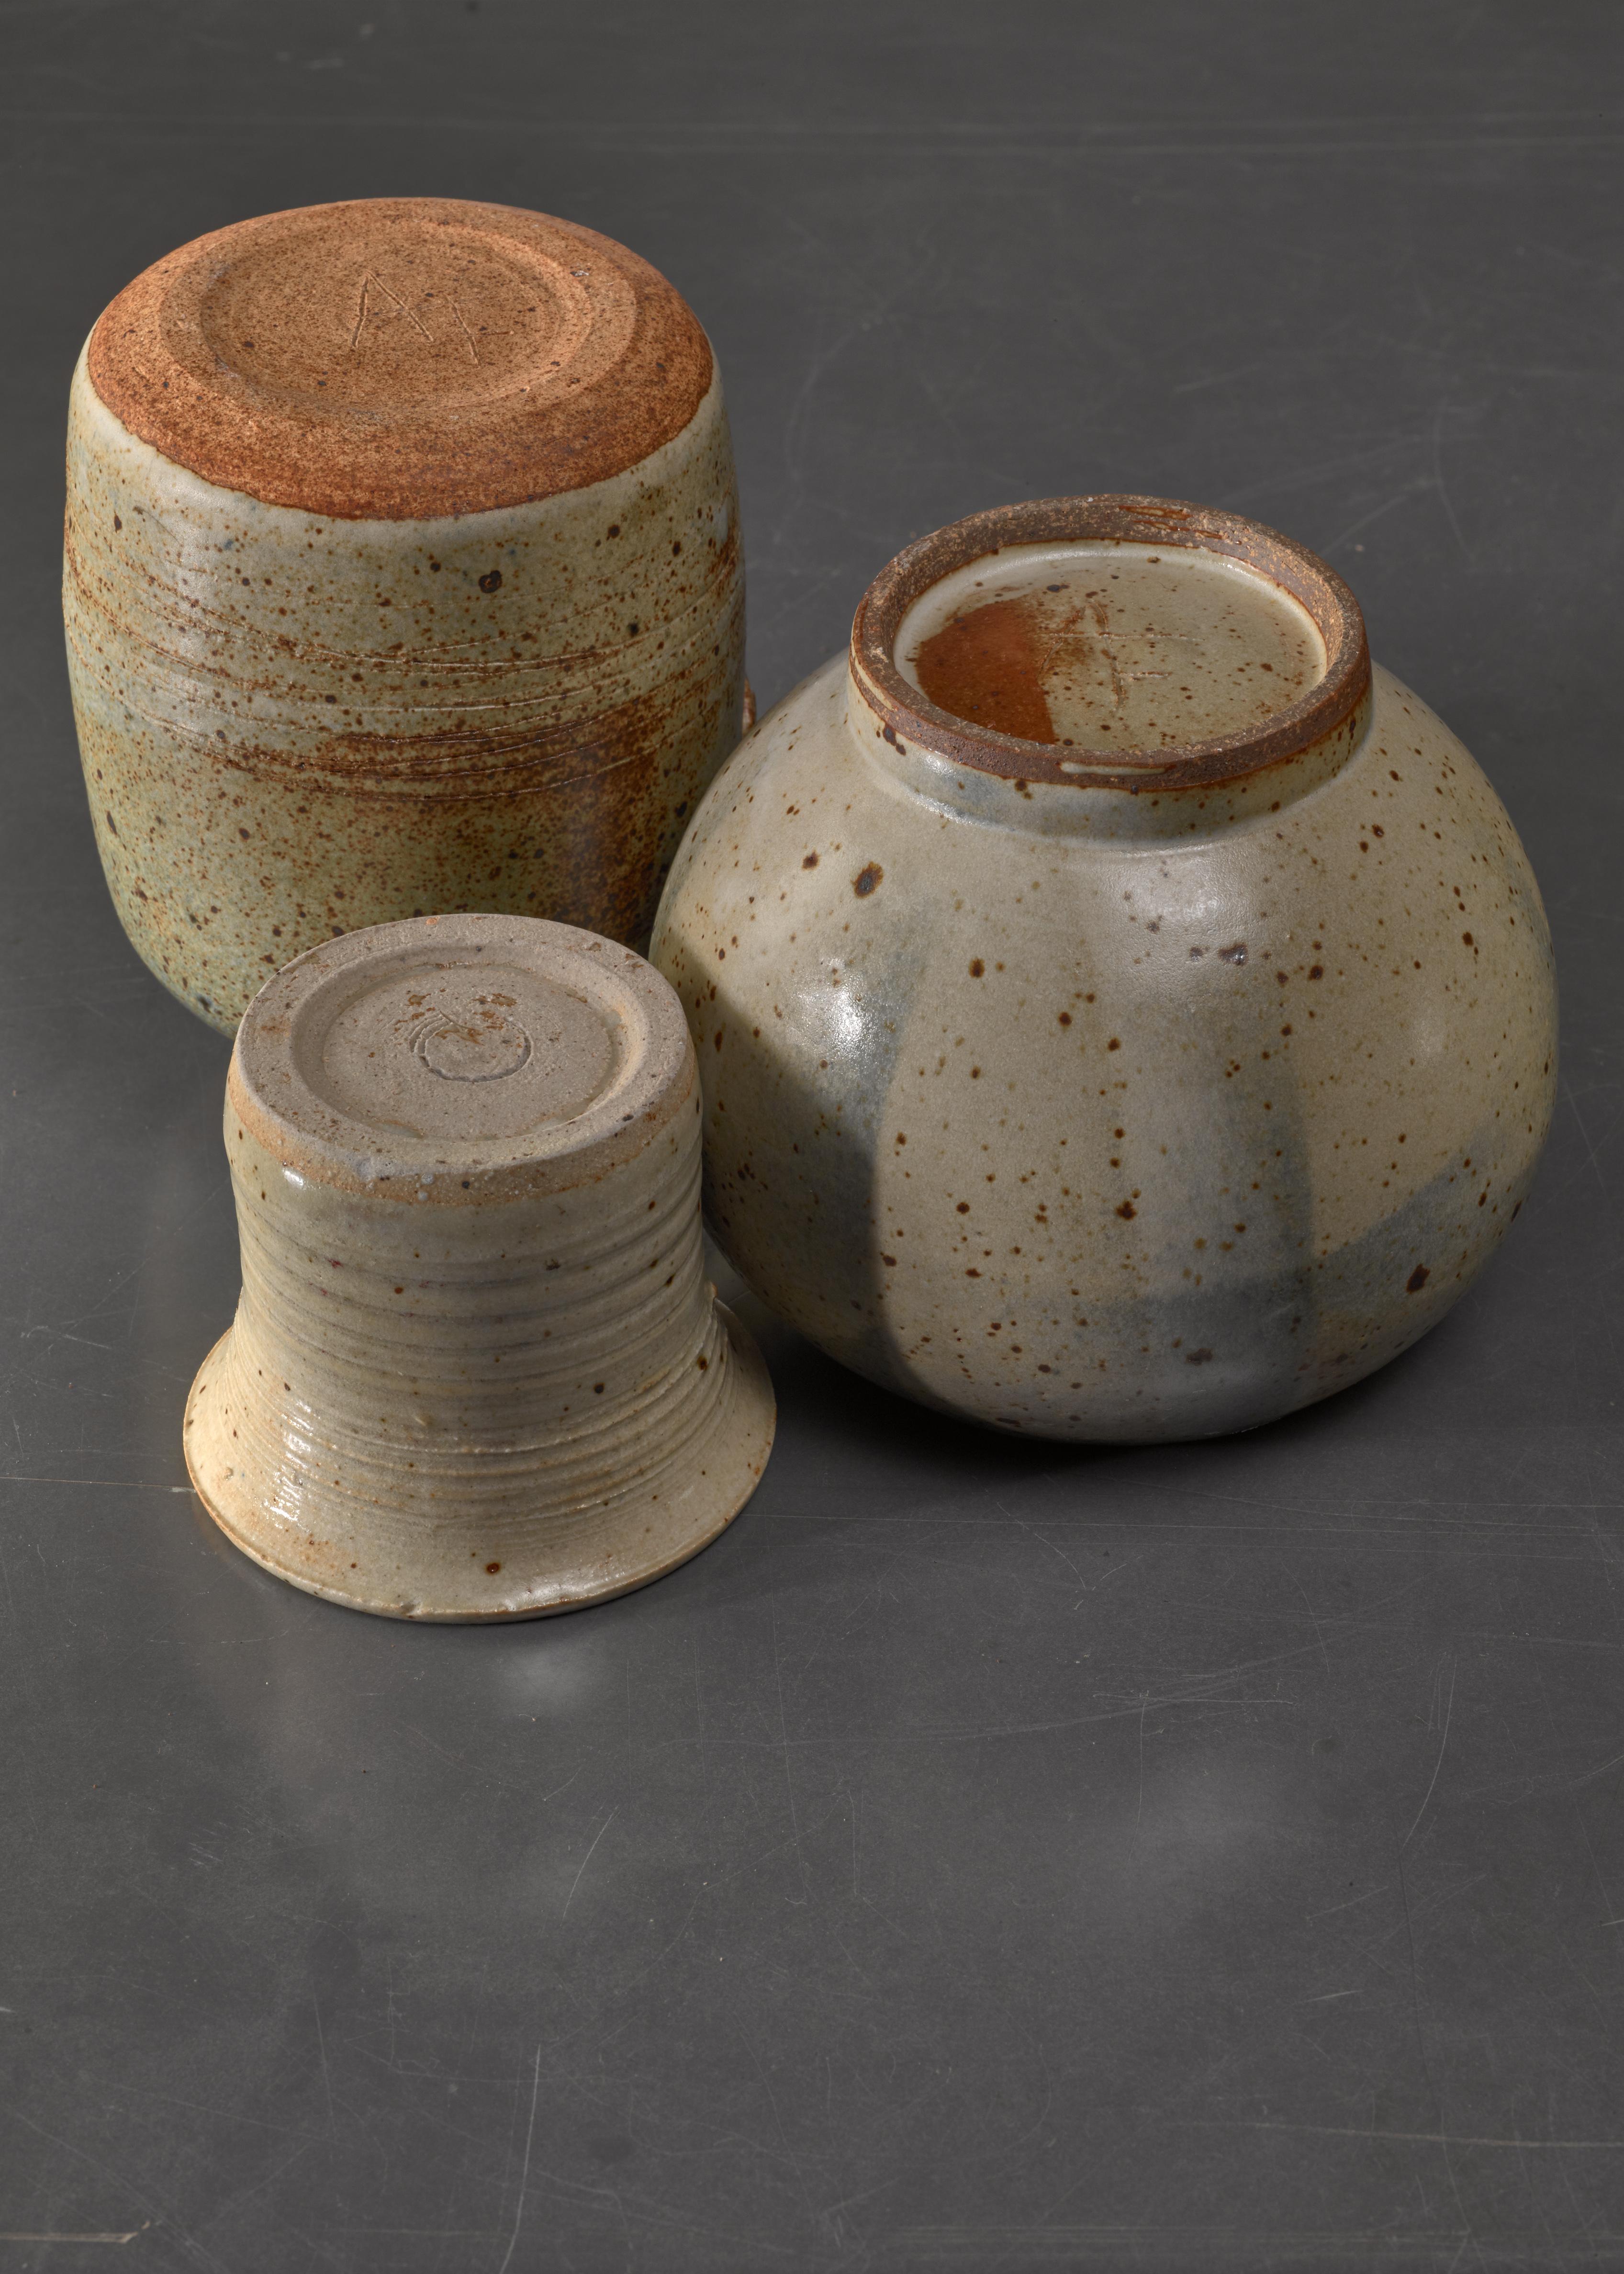 A combination of three Franco Agnese ceramic pieces; an ikebana vase, a small vase and a small jar in greystone.

Beautiful composition in itself that can be enhanced with some small flowers or plants.

The measurements stated are of the